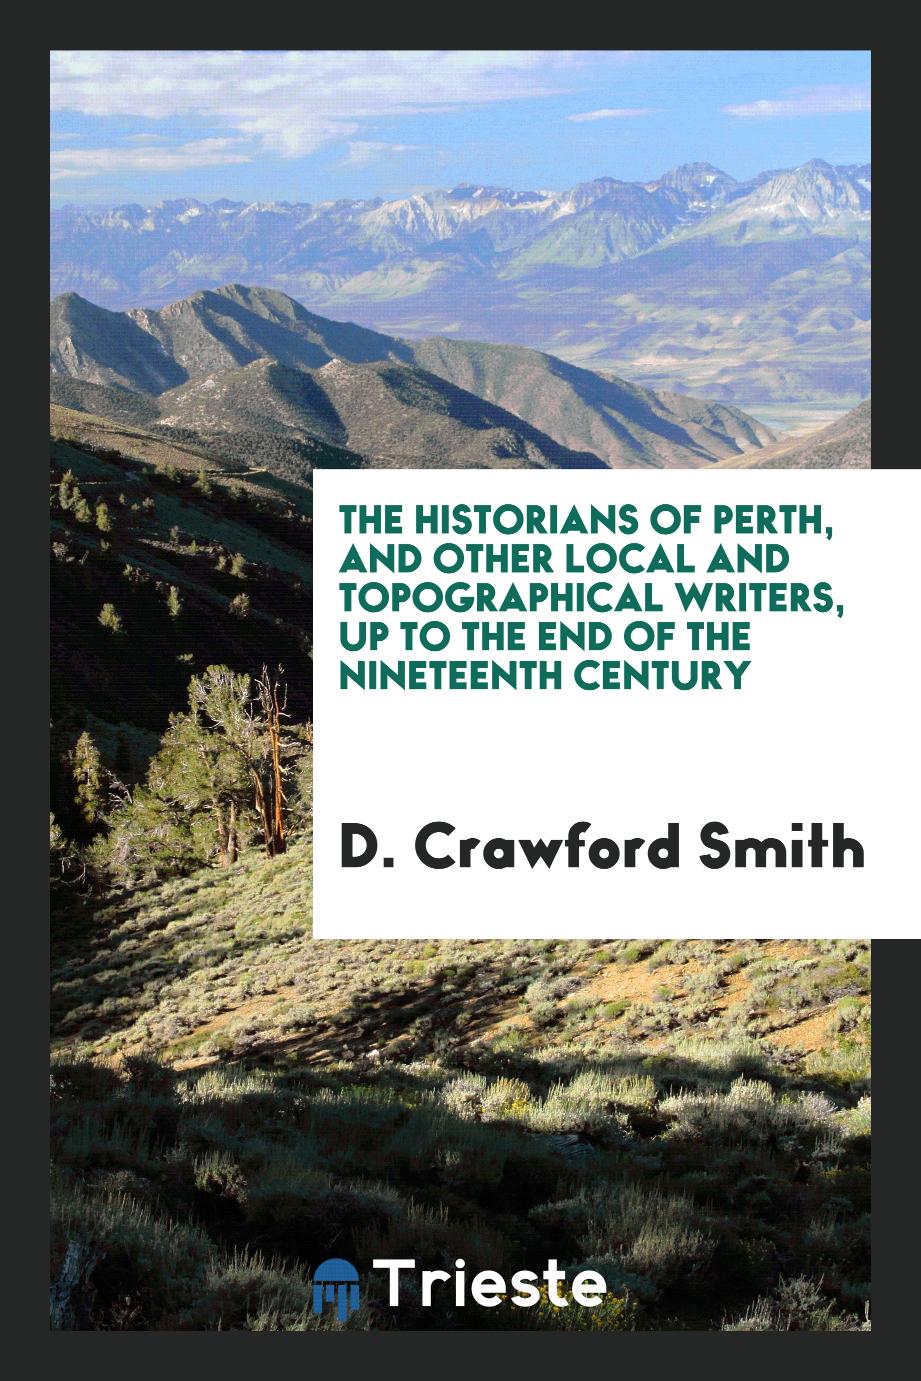 The Historians of Perth, and Other Local and Topographical Writers, up to the End of the Nineteenth Century